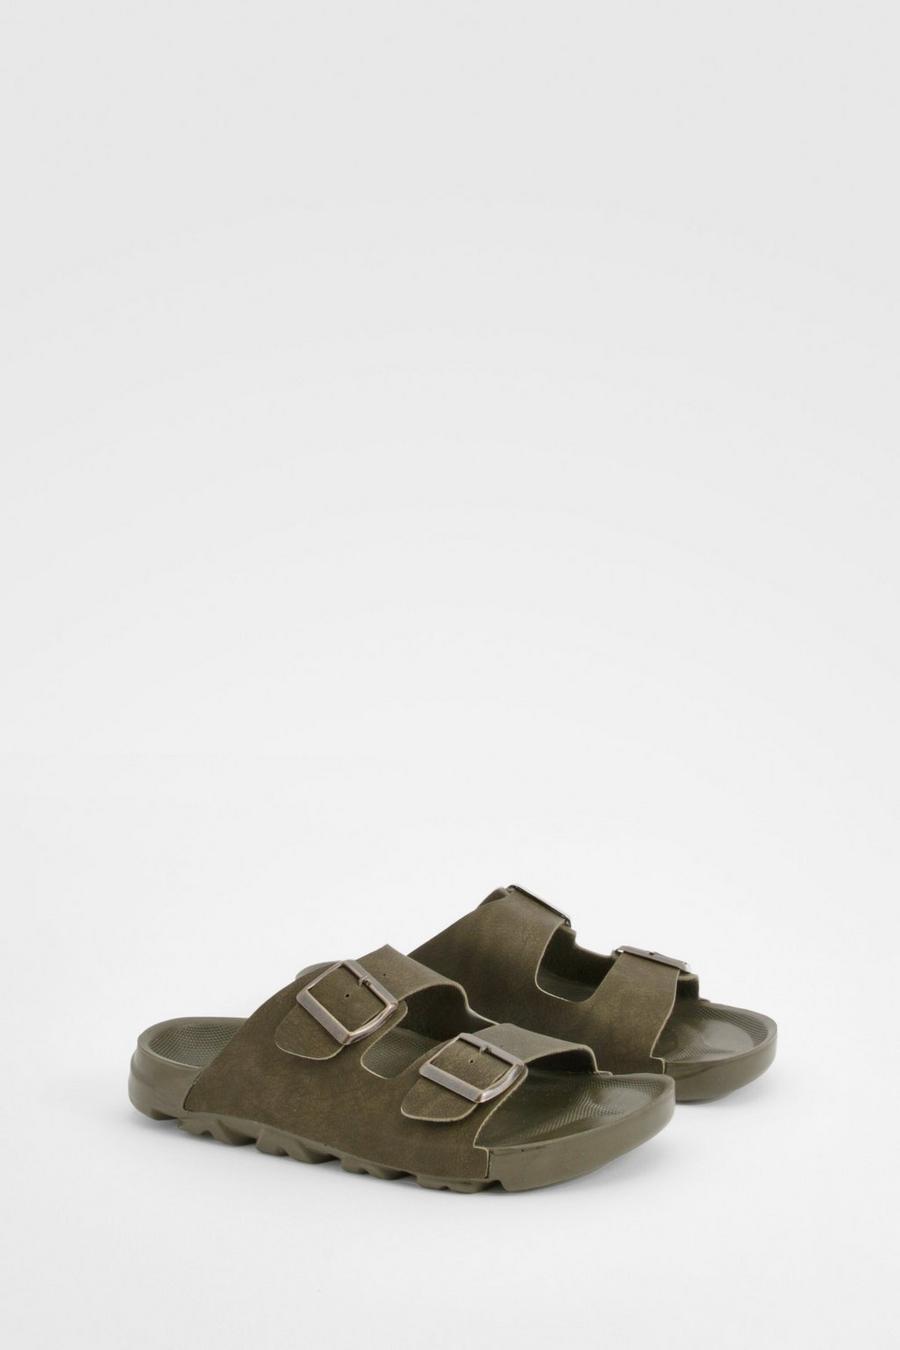 Khaki Wide Fit Double Buckle Footbed Sliders 